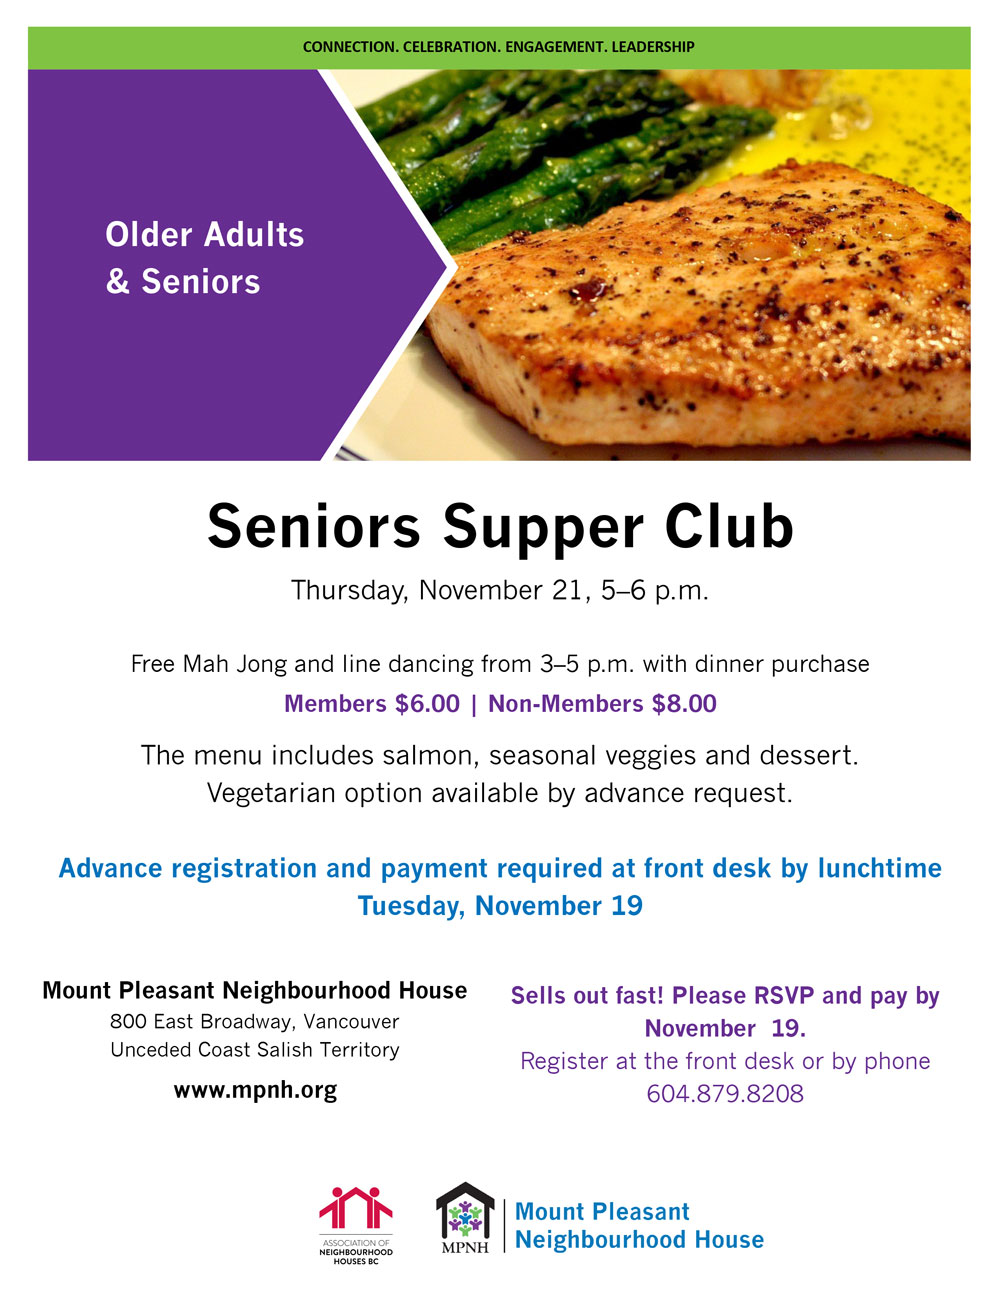 An image of the poster with event details, featuring a photo of grilled wild salmon with asparagus.